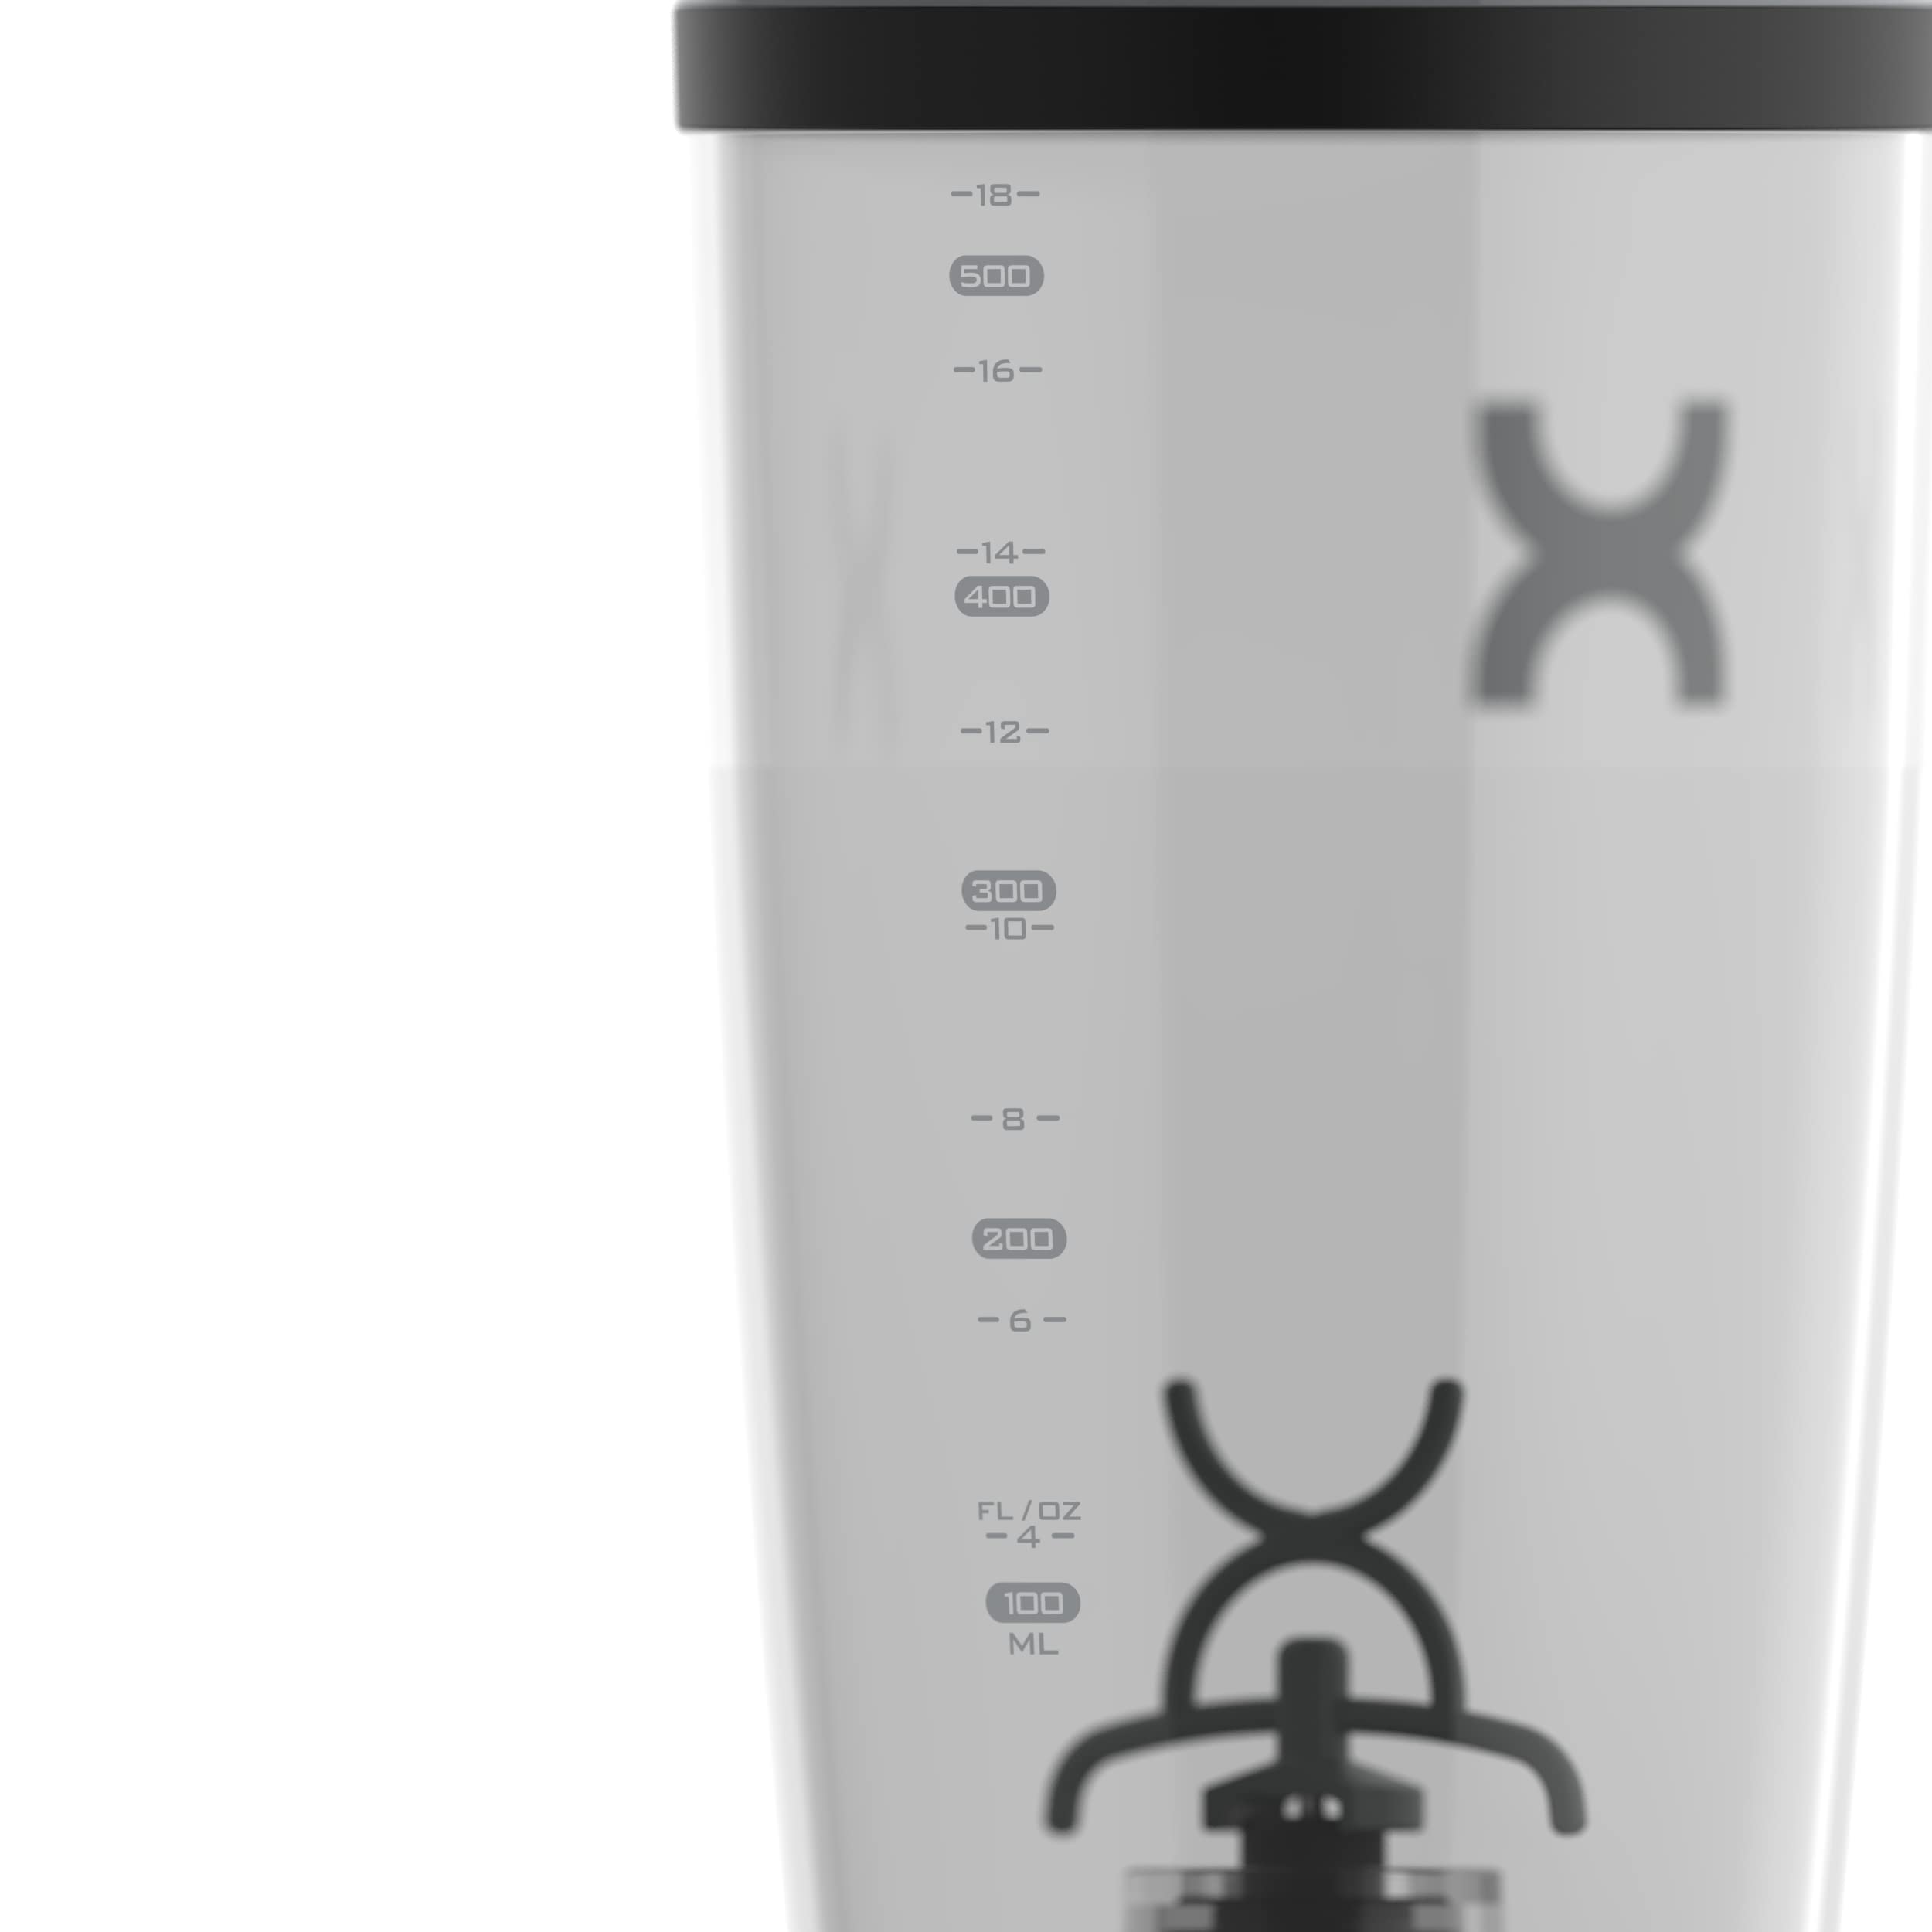 Promixx Original Shaker Bottle - Battery-powered for Smooth Protein Shakes - BPA Free, 20oz Cup (Black)